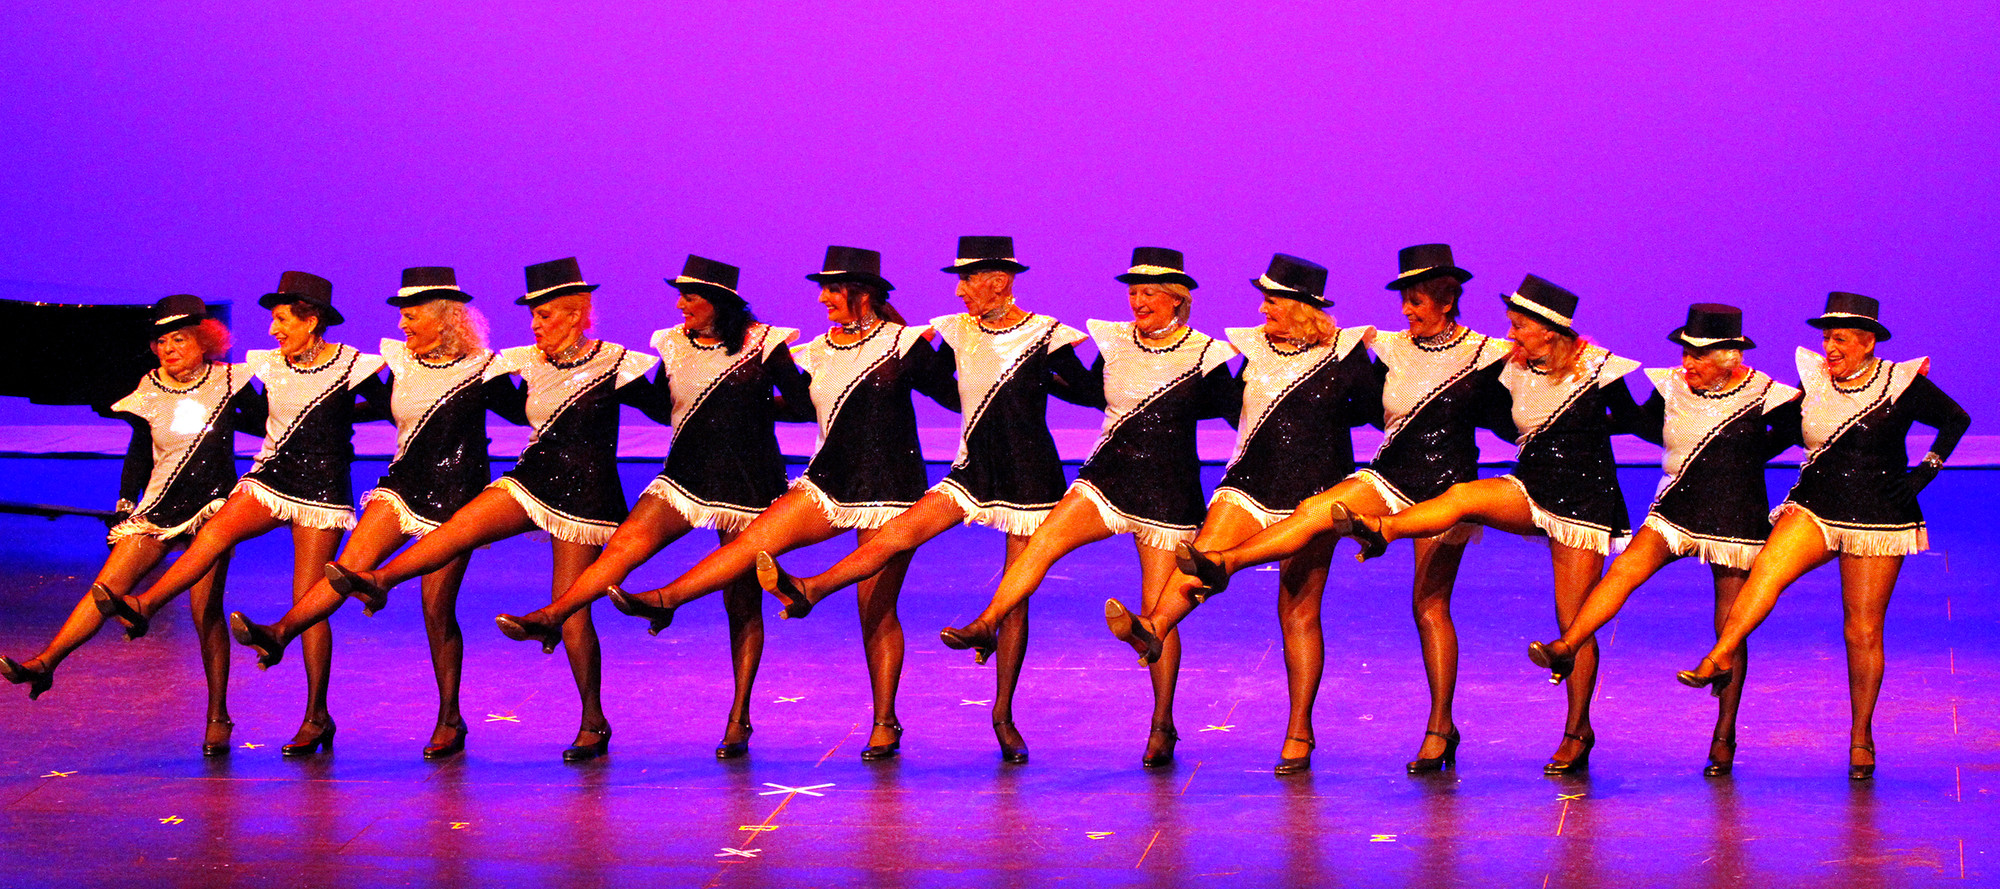 The Seasoned Steppers perform to New York, New York.